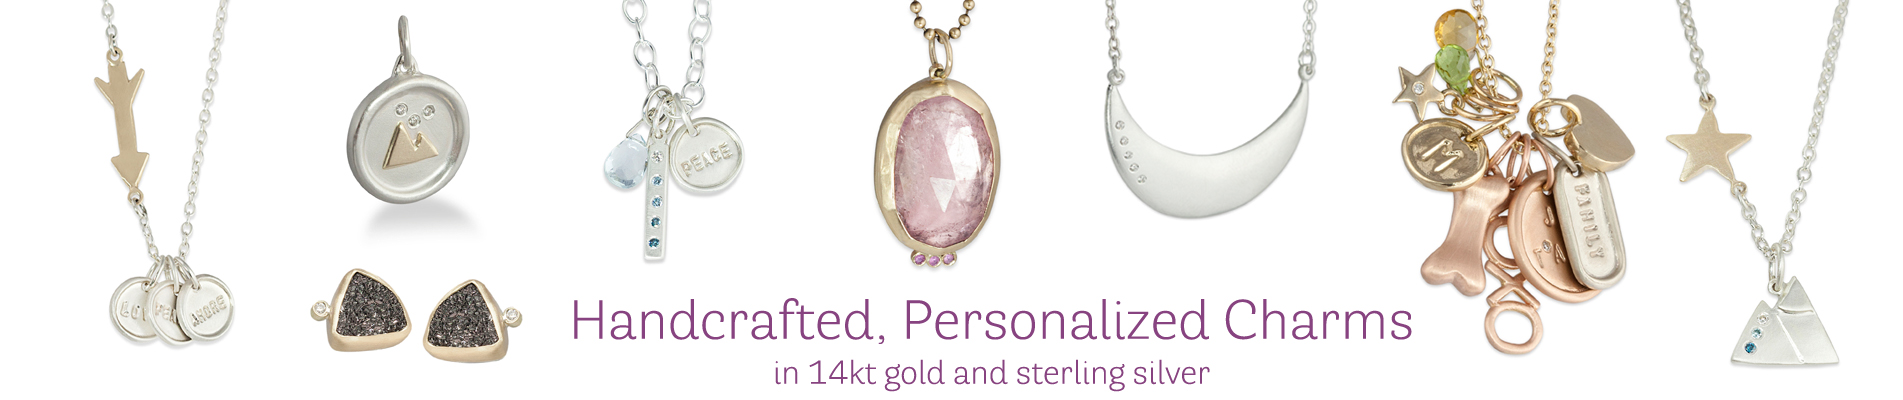 Jewelry by Cari Handcrafted Personalized Fine Charm Jewelry in Sterling ...